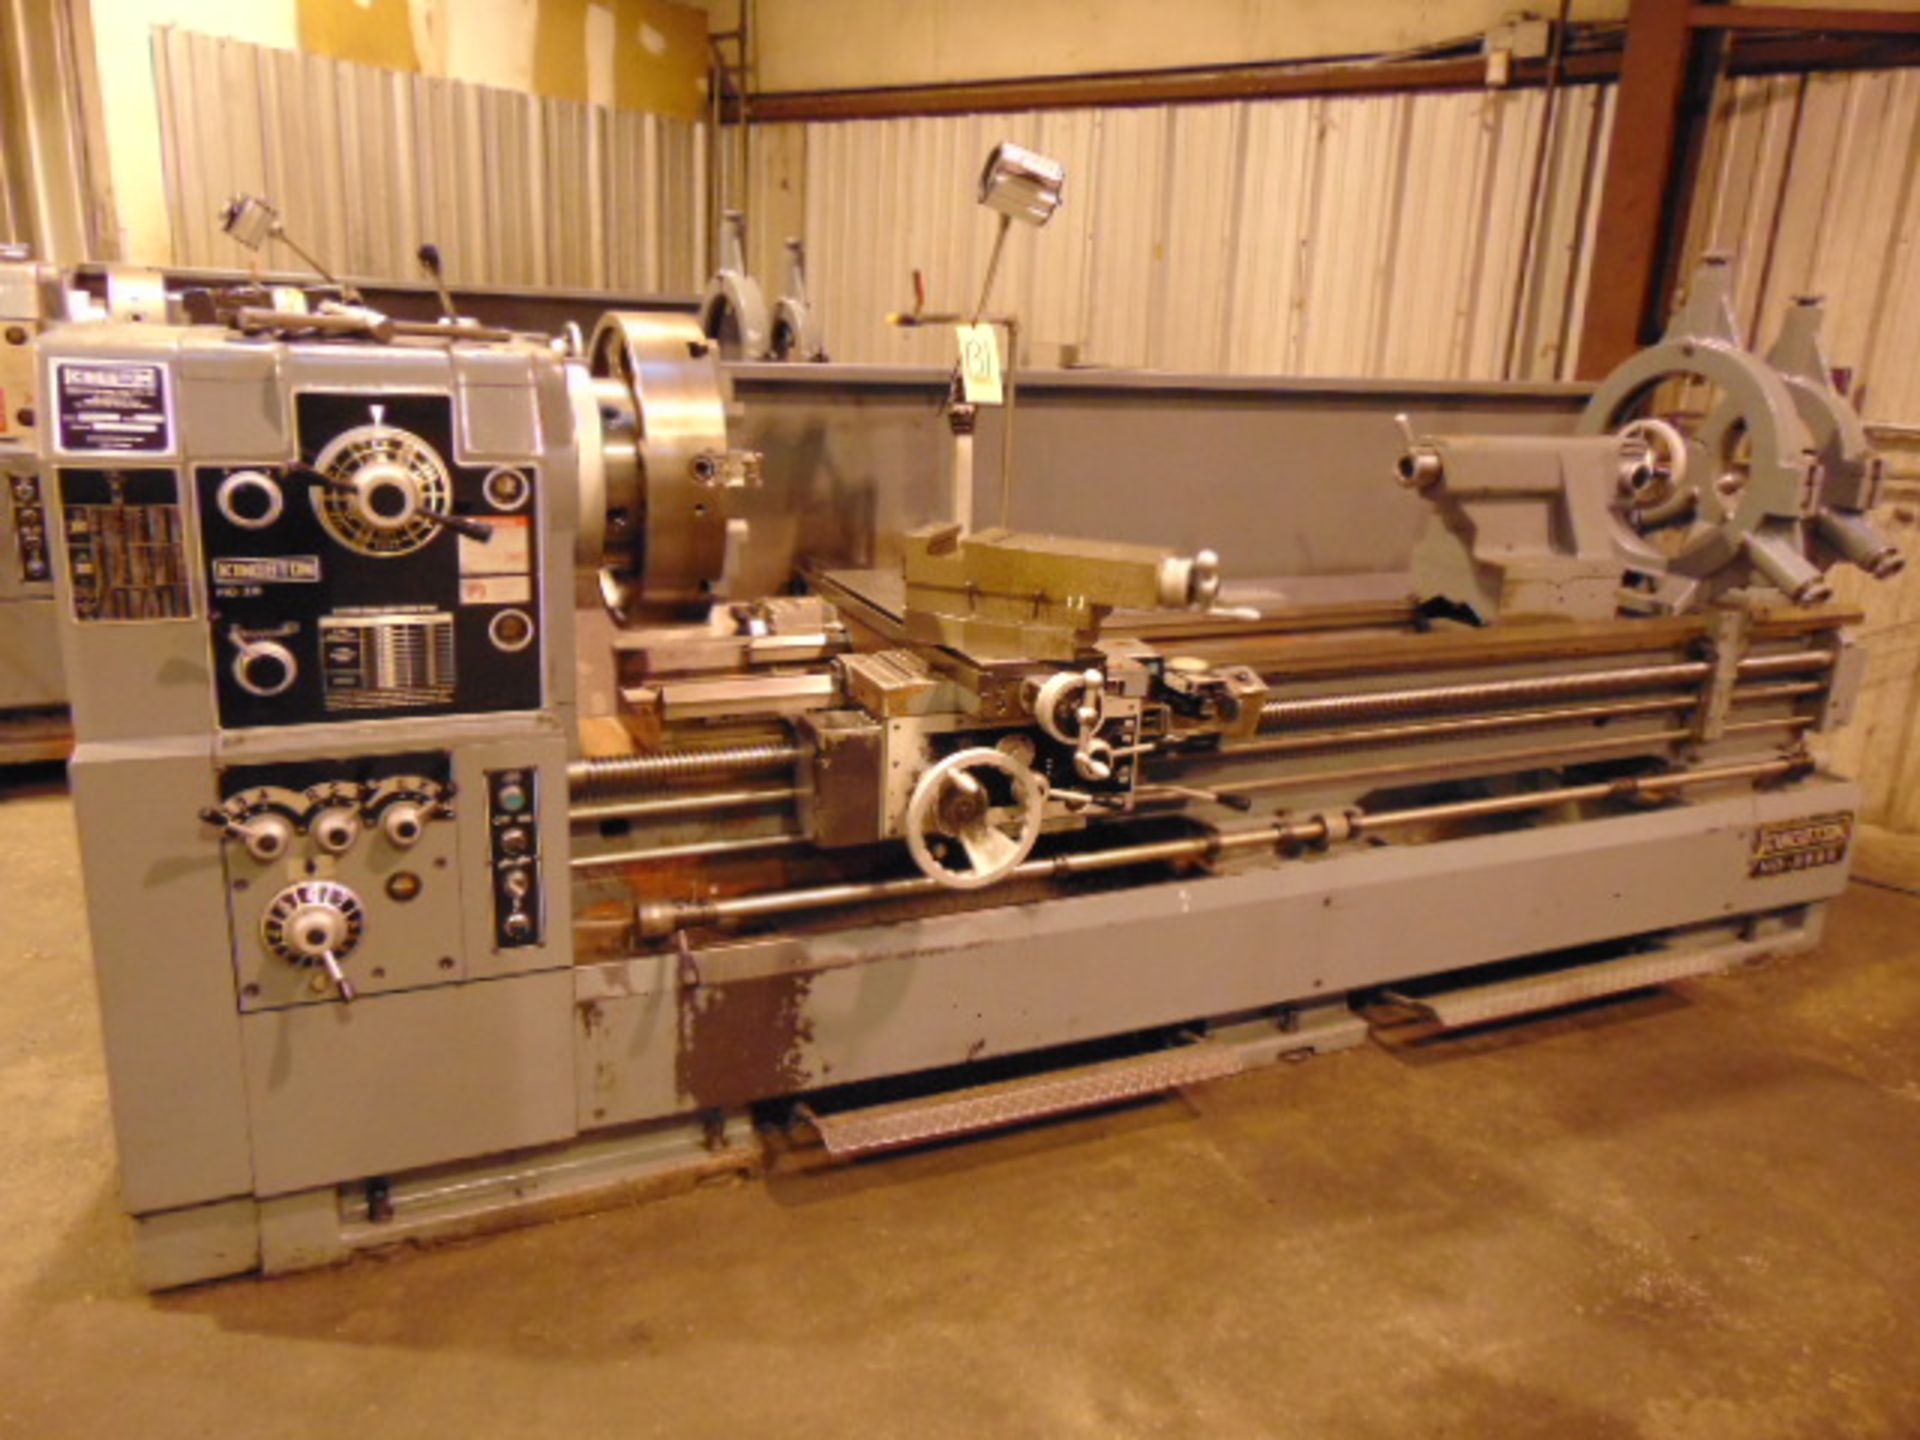 GAP BED ENGINE LATHE, KINGSTON 26” X 90” MDL. HD2690, new 2014, 35.1" sw. in gap, 17.5" sw. over